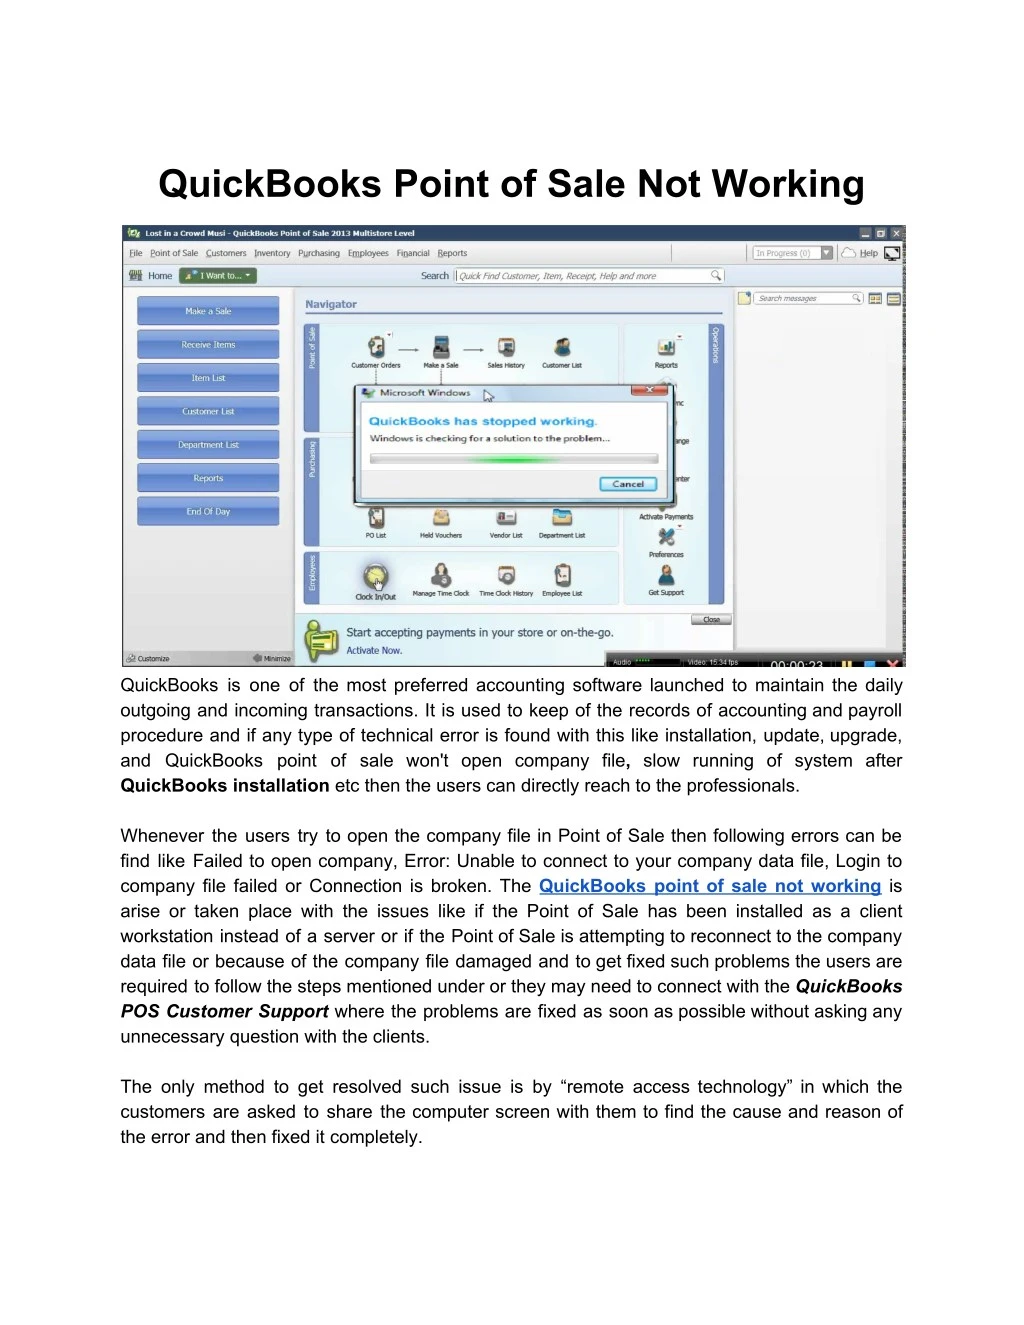 quickbooks point of sale not working